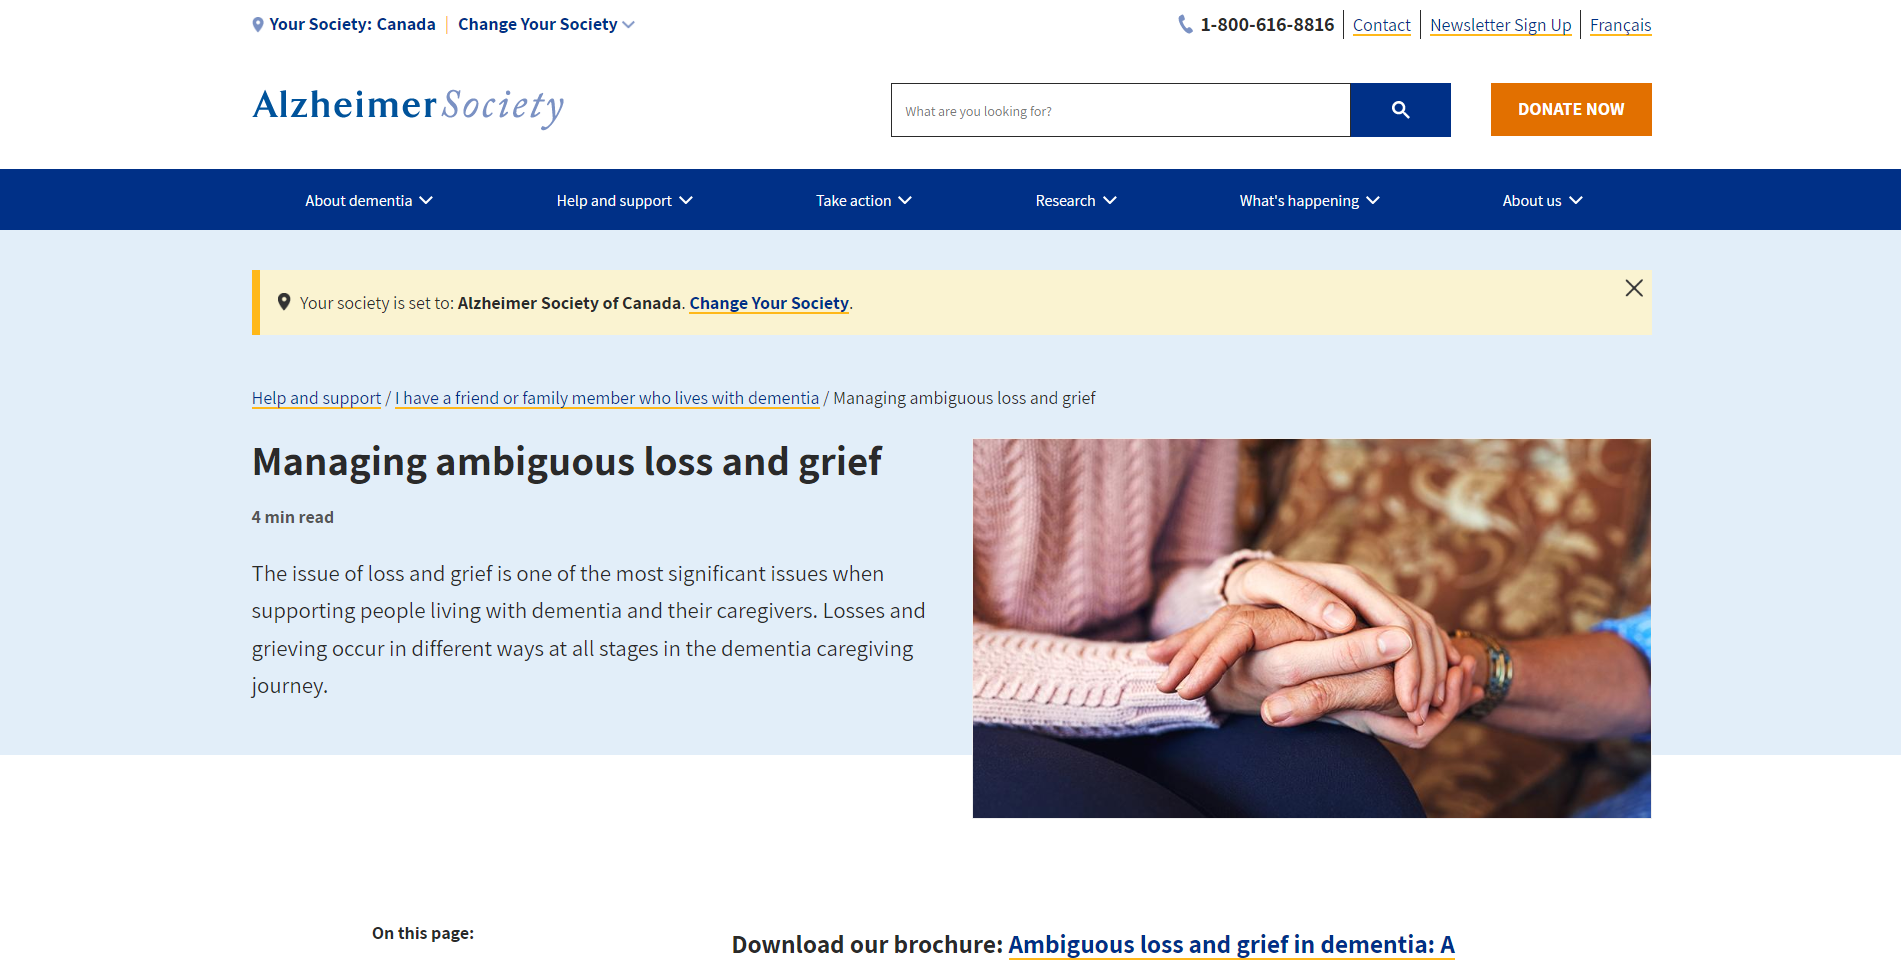 Managing ambiguous loss and grief